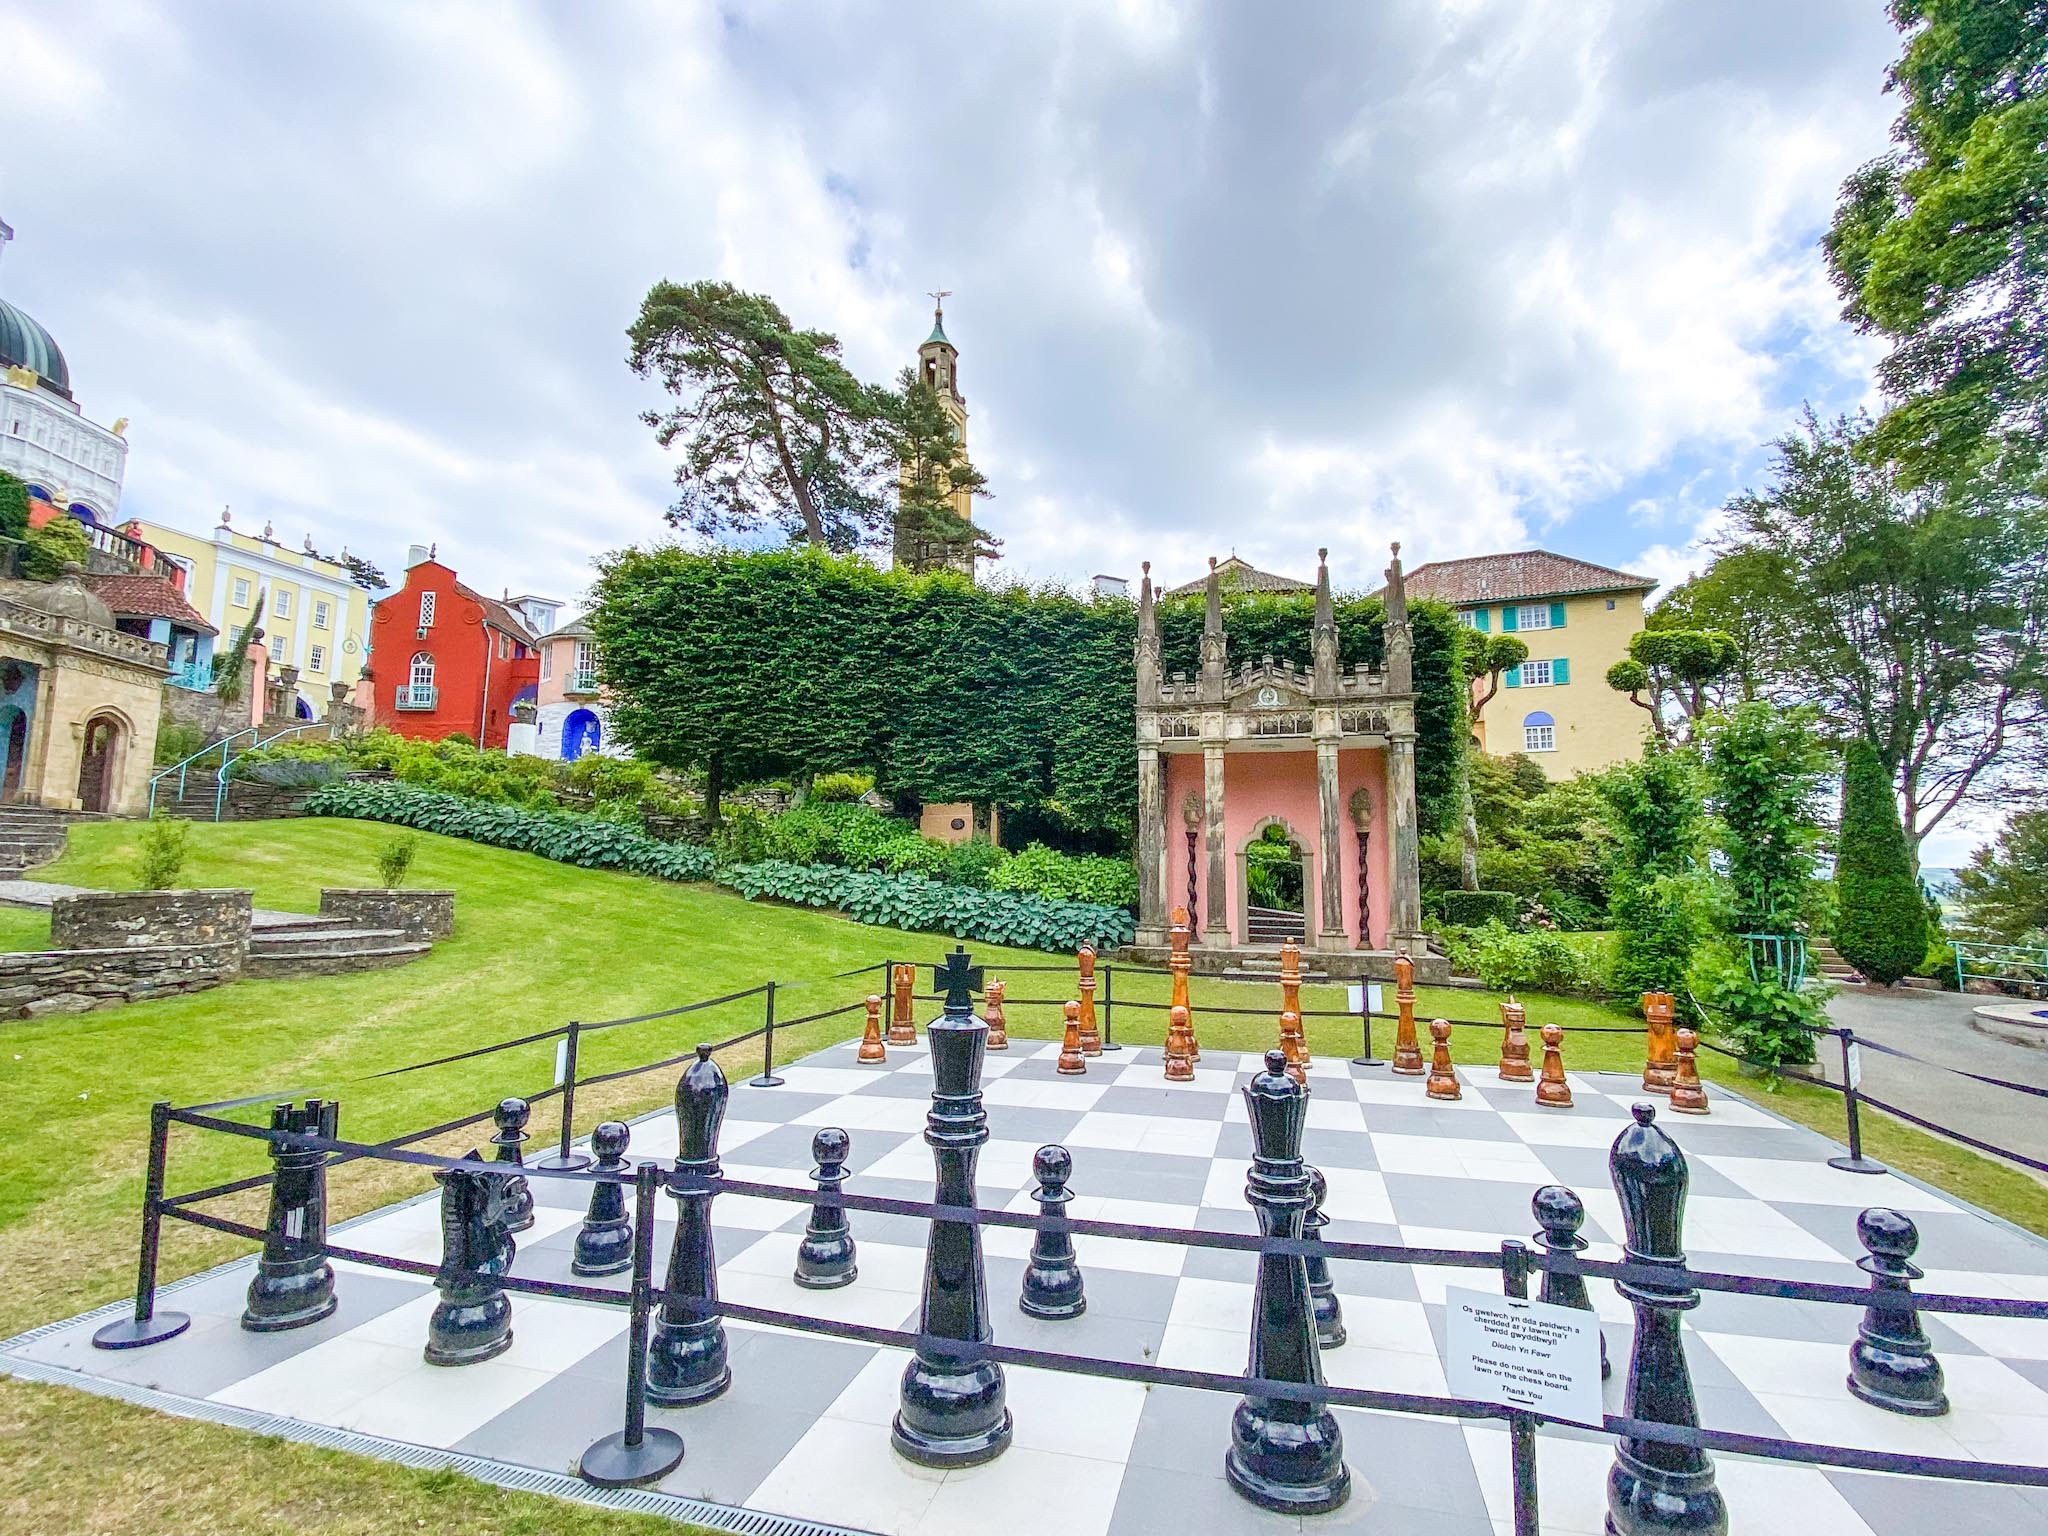 Visiting Portmeirion, large chess board and gardens at Portmeirion